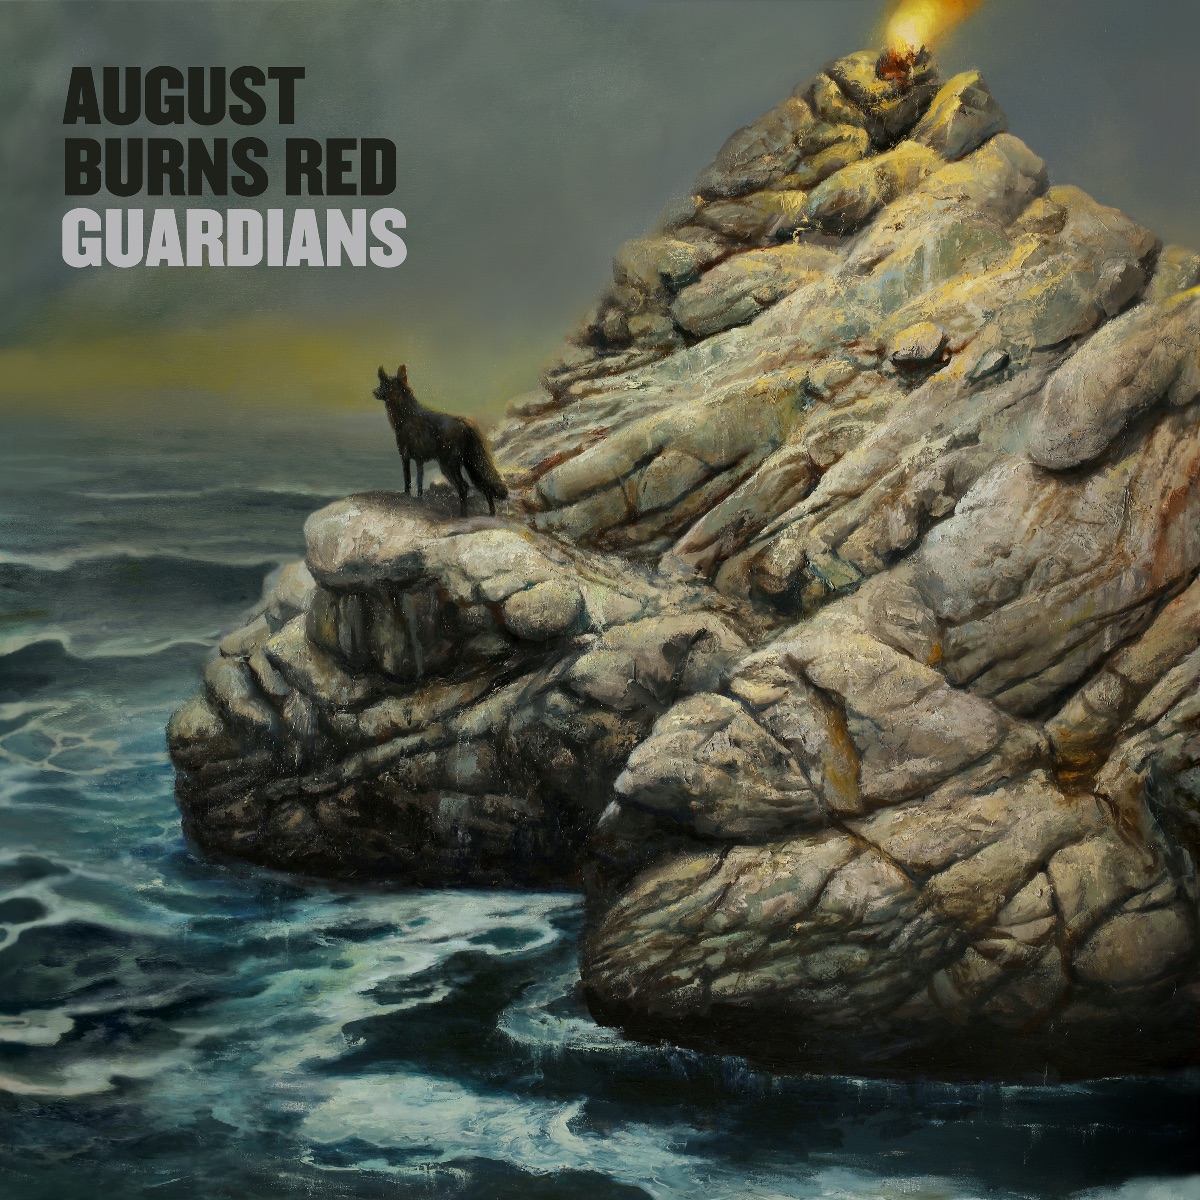 August Burns Red Have Some News To Share With You... 🔥